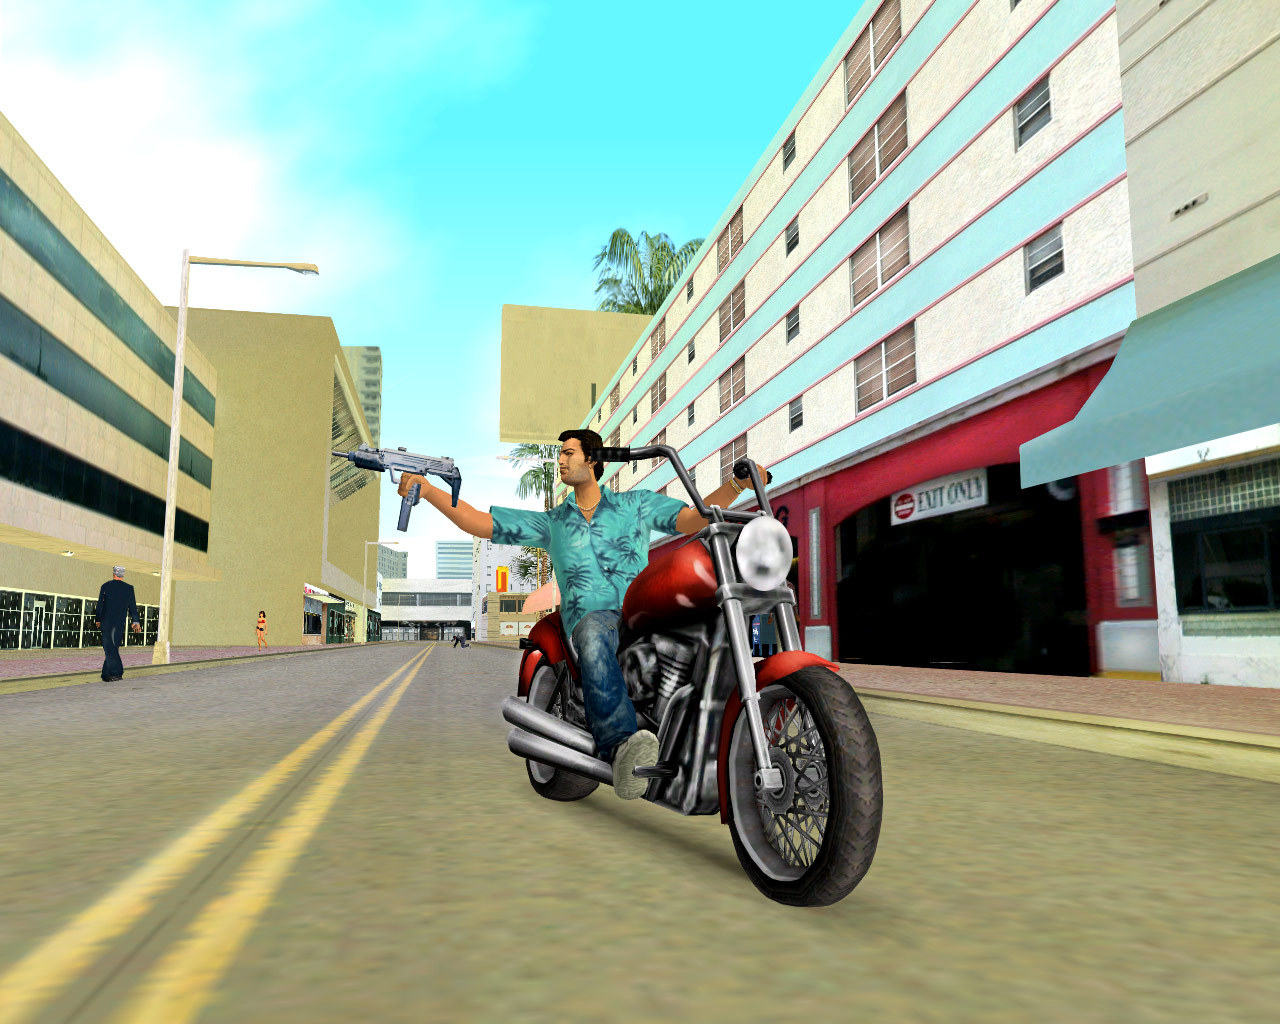 How To Install Gta Vice City In Android For Free